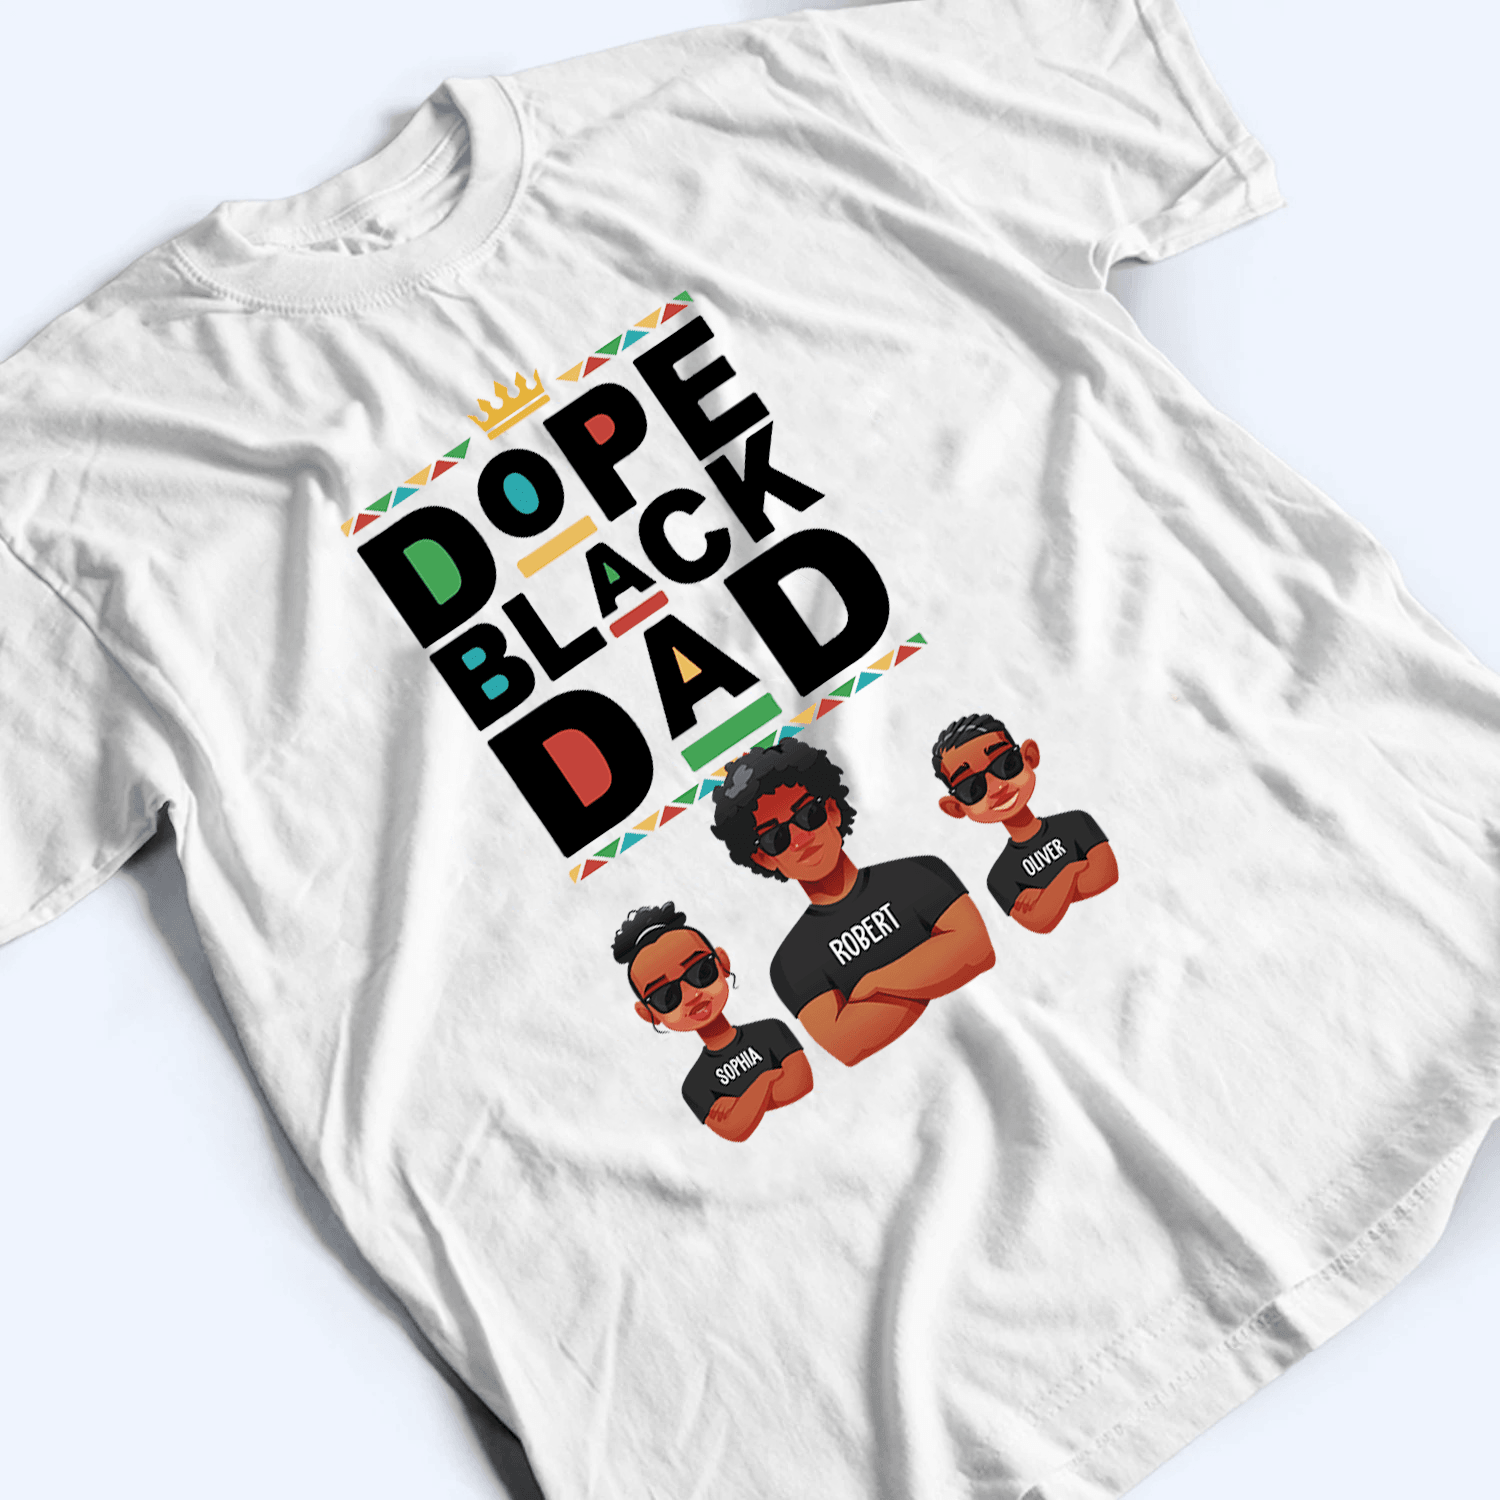 Dope Black Dad - Personalized Custom T Shirt - Father's Day Gift for Black Dad, Grandpa, Daddy, Dada, African American, Black History Month, Juneteenth